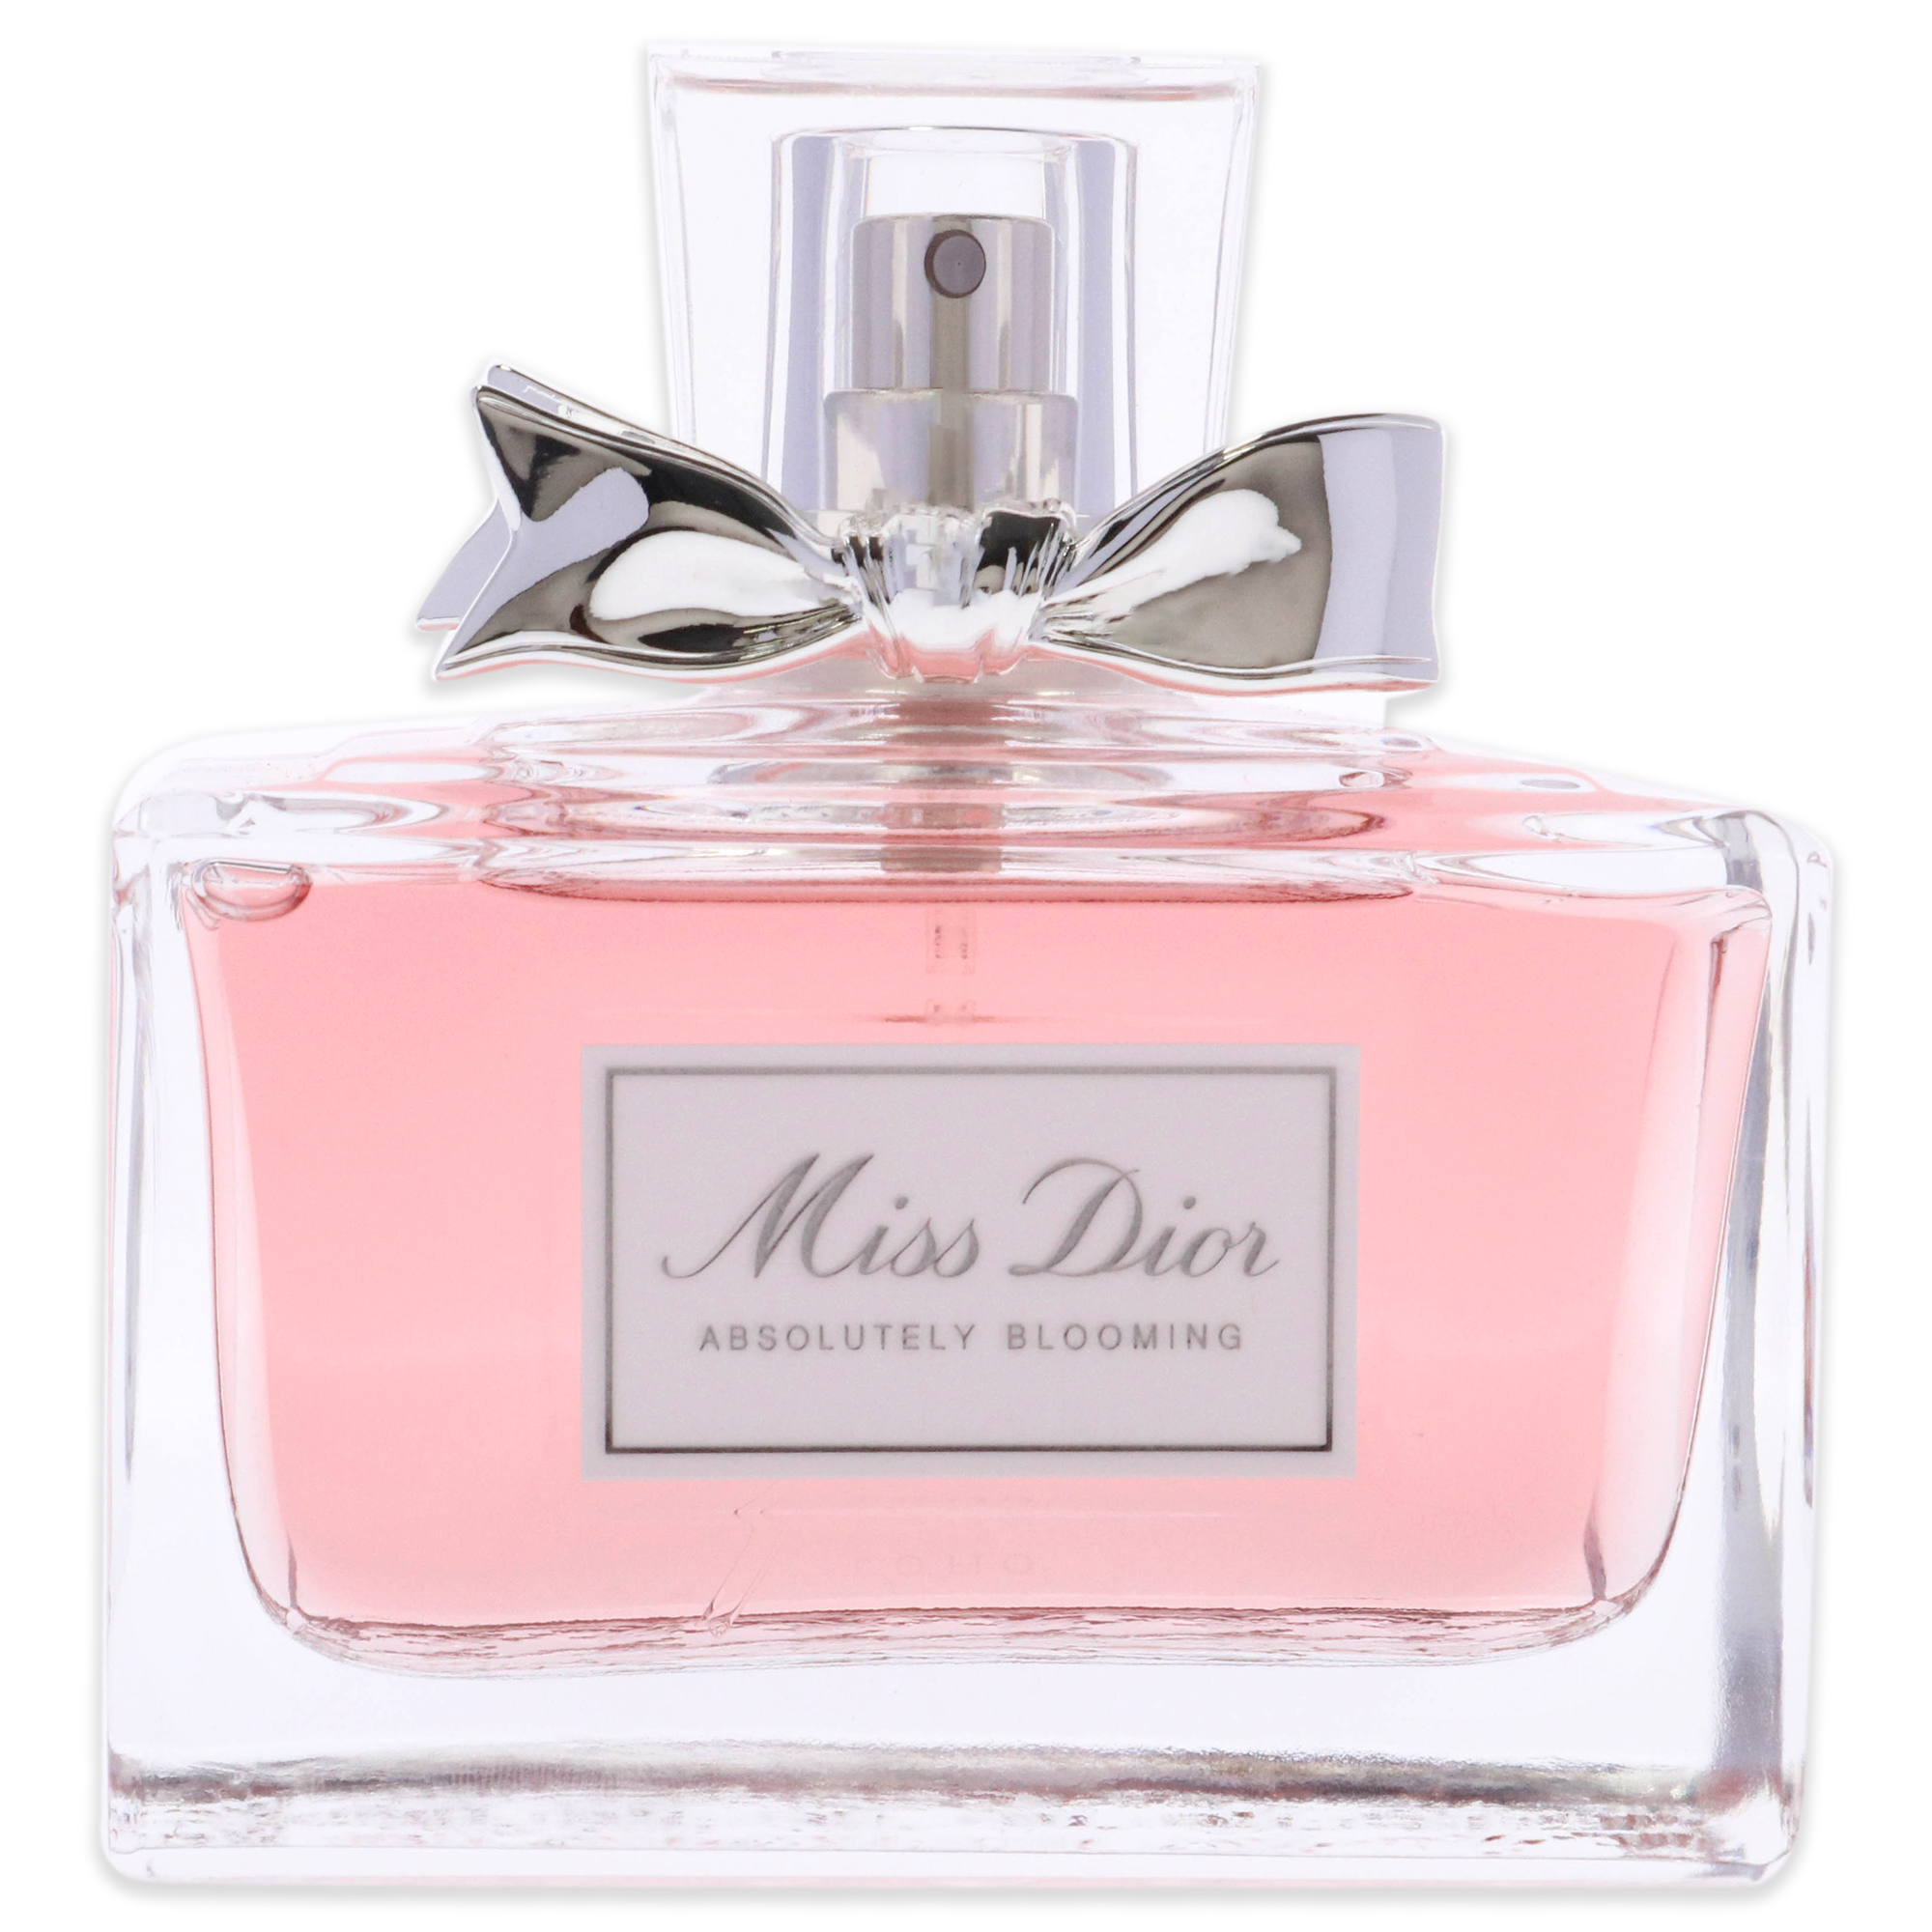 Dior Miss Dior Absolutely Blooming Eau de Parfum, Perfume for Women, 3.4 Oz - image 2 of 2